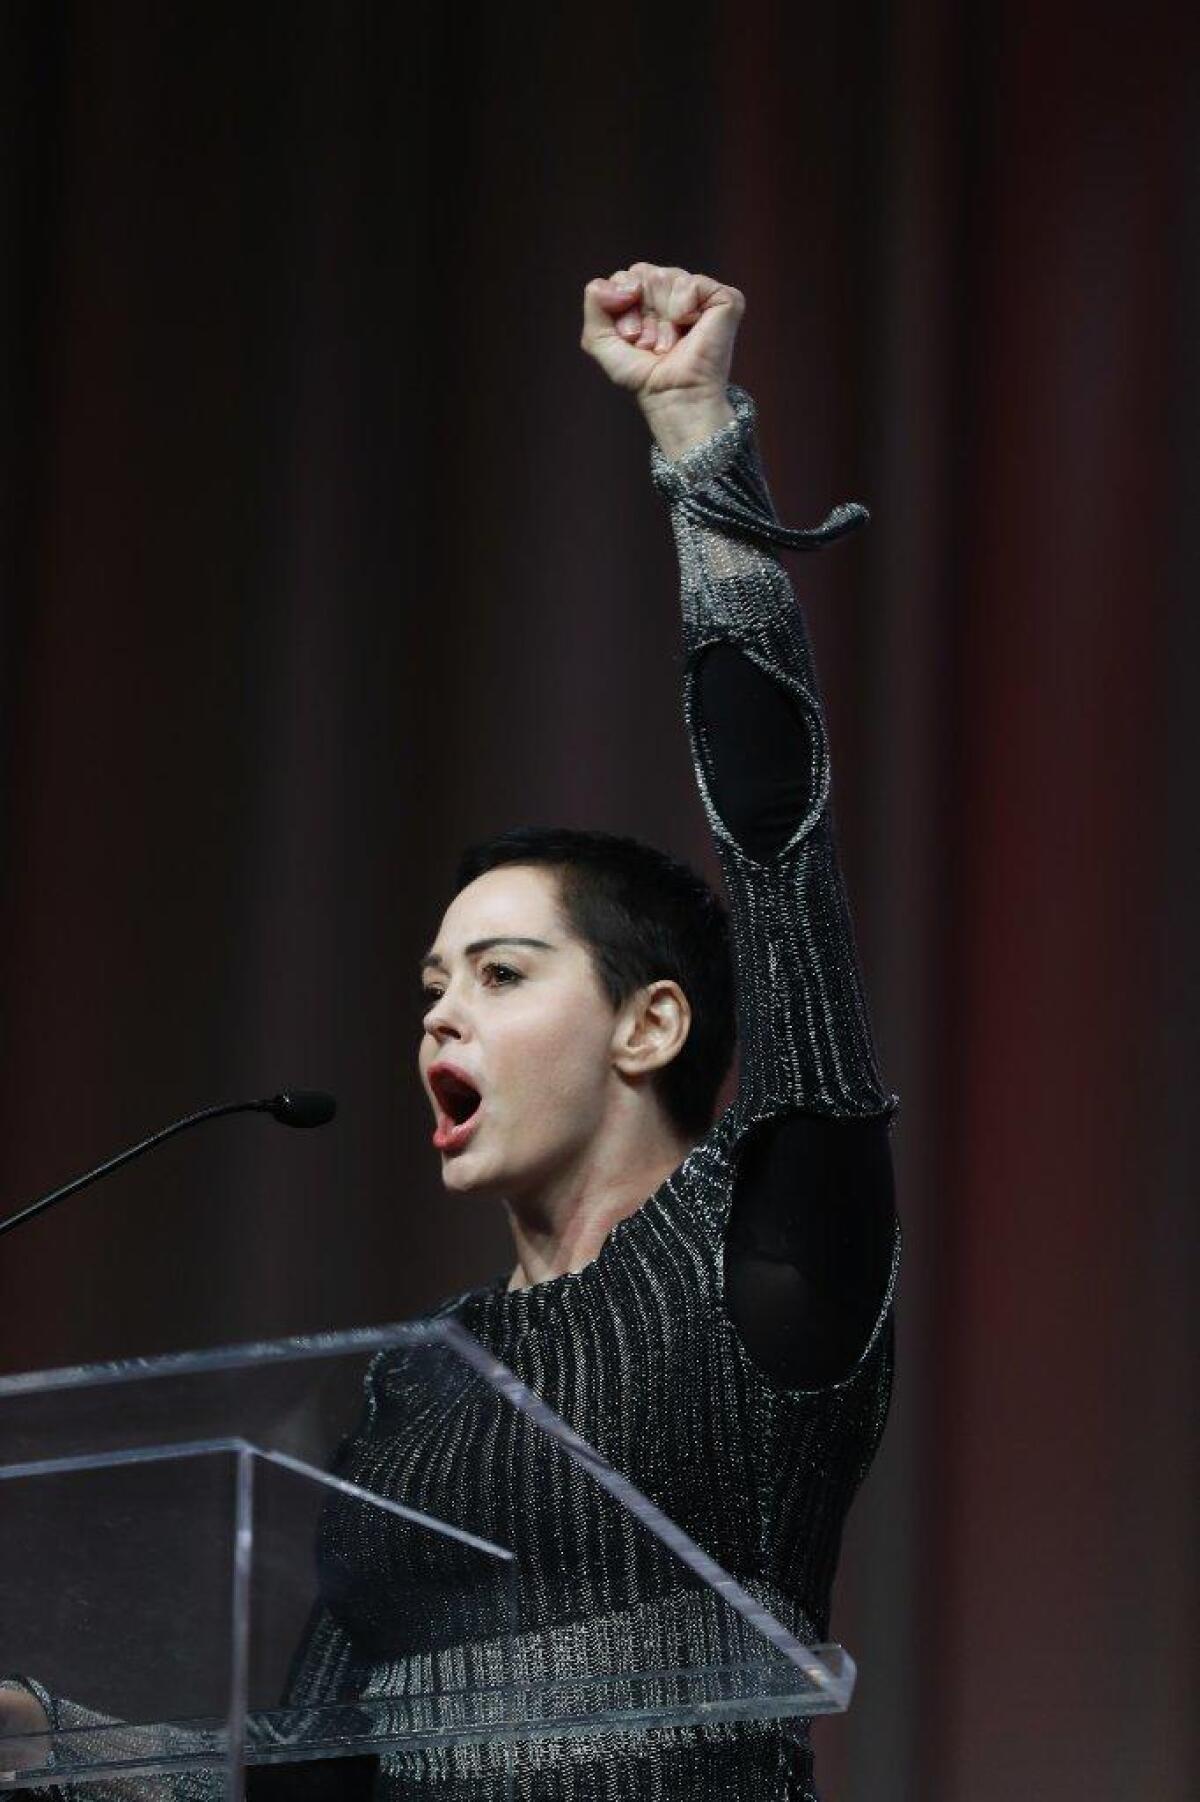 Rose McGowan speaks at the Women's Convention in Detroit on Friday.